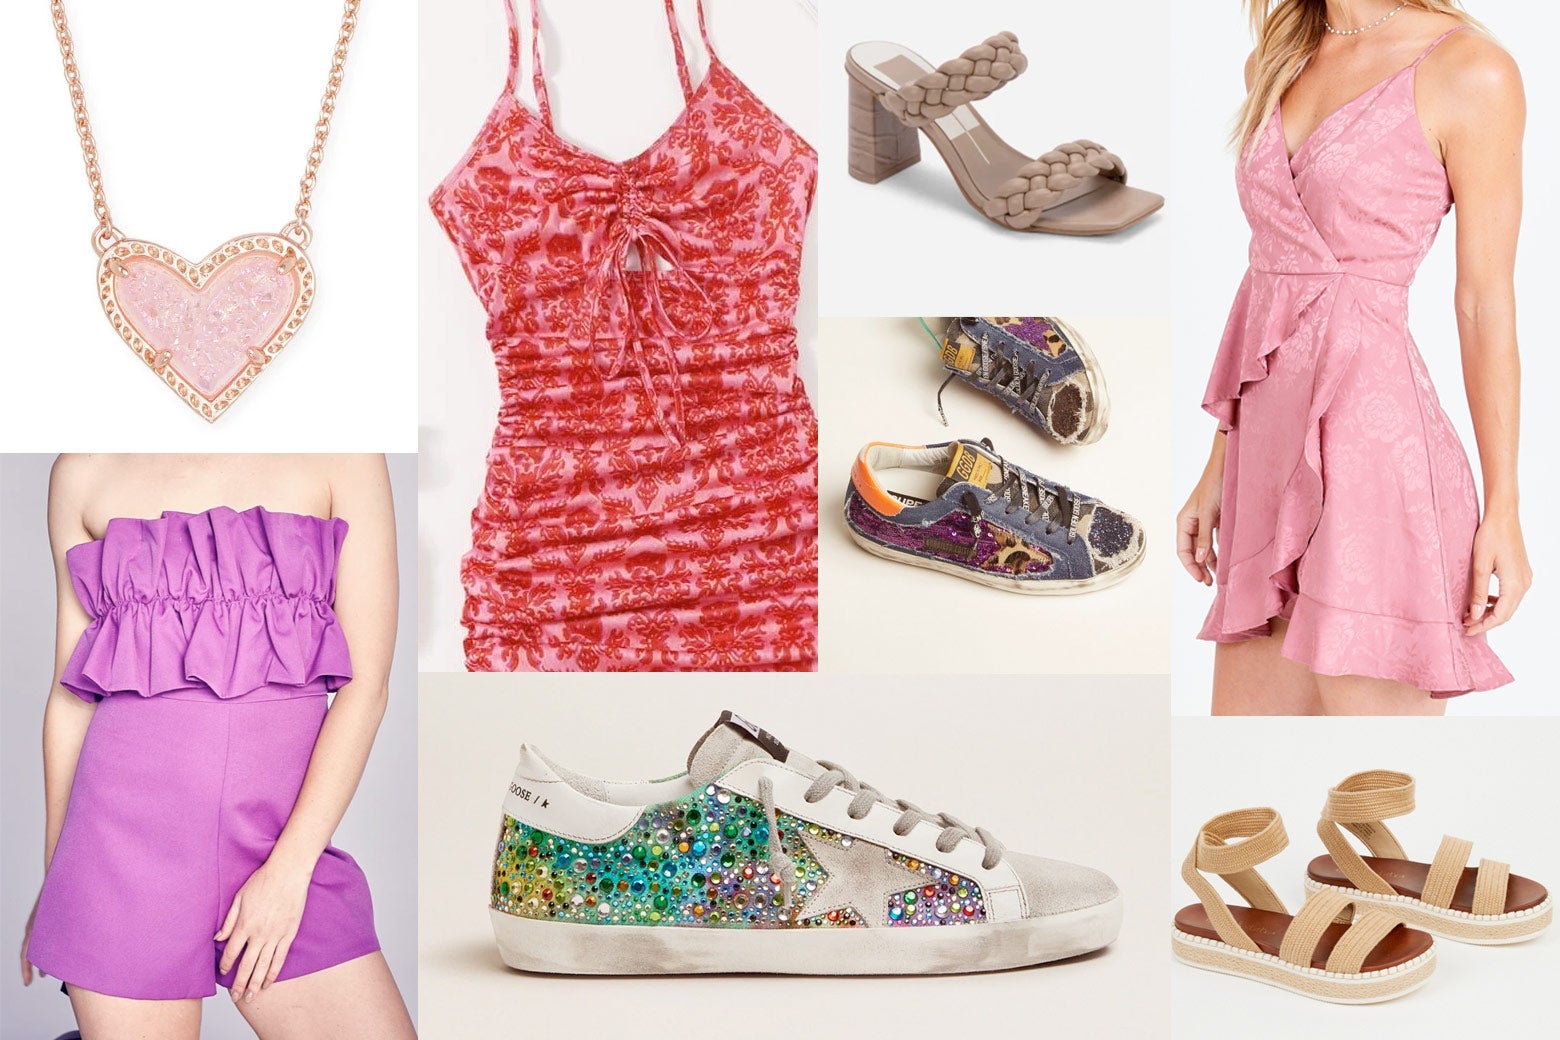 A collage of photos of a heart necklace from Kendra Scott, dresses and sandals from Shein, the Pants Store, and Altar'd State, and Golden Goose sneakers.